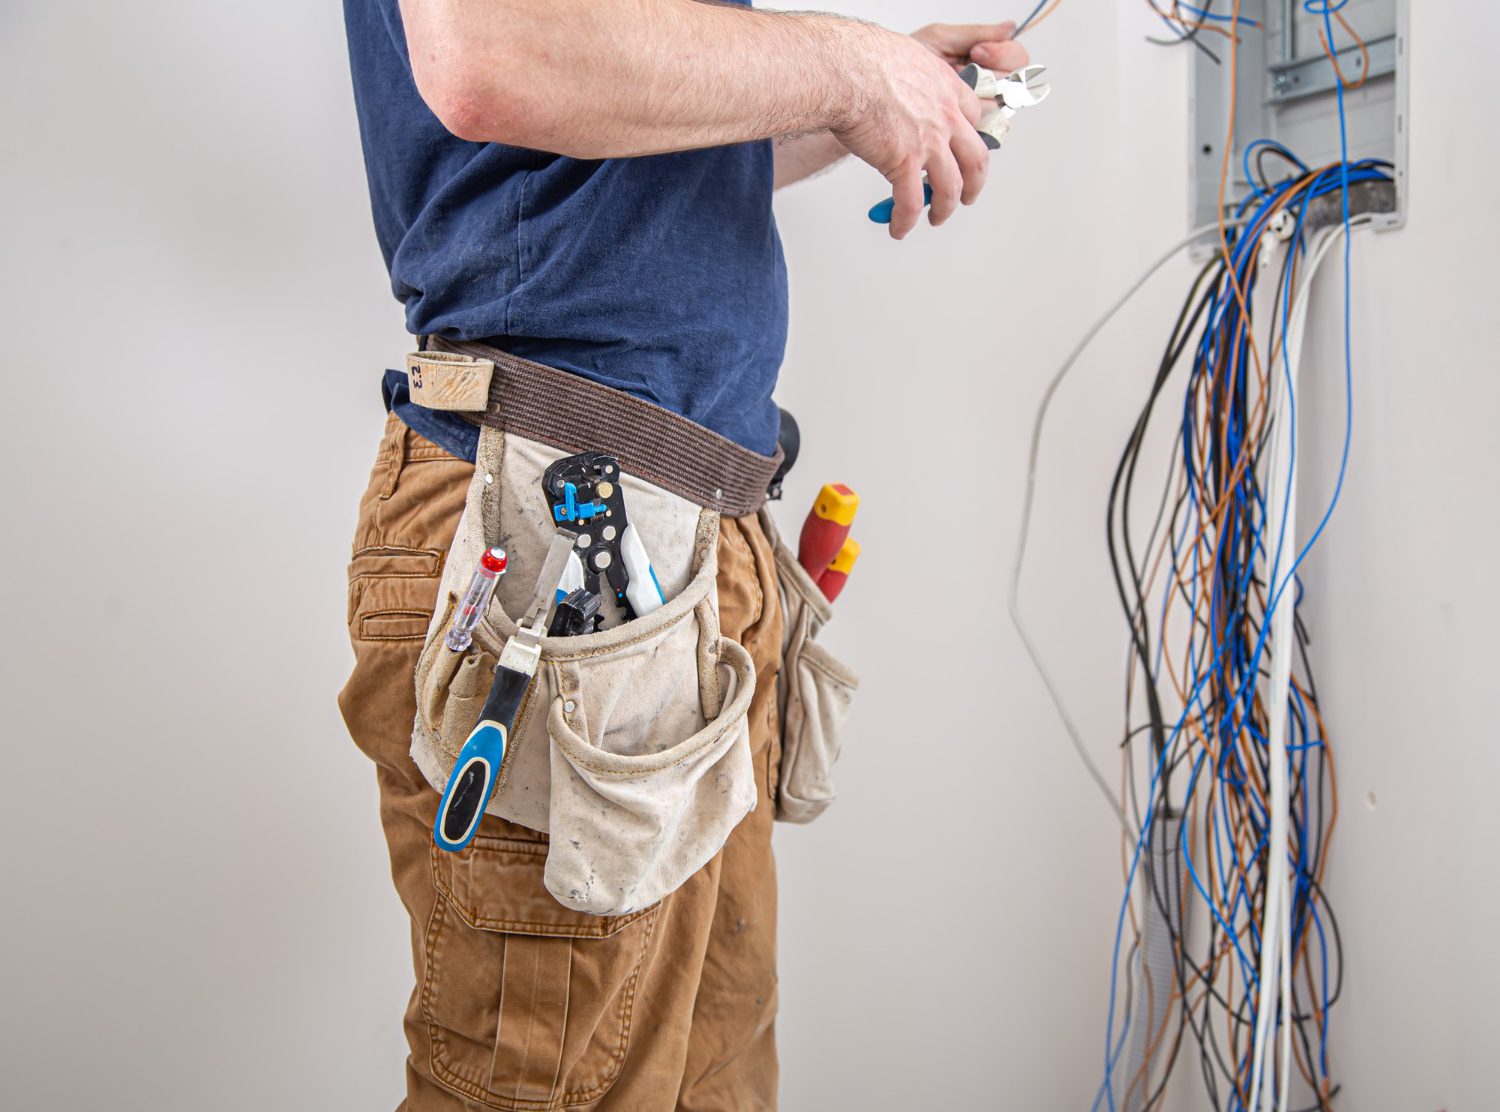 Electrical rewiring services for home renovations and new construction